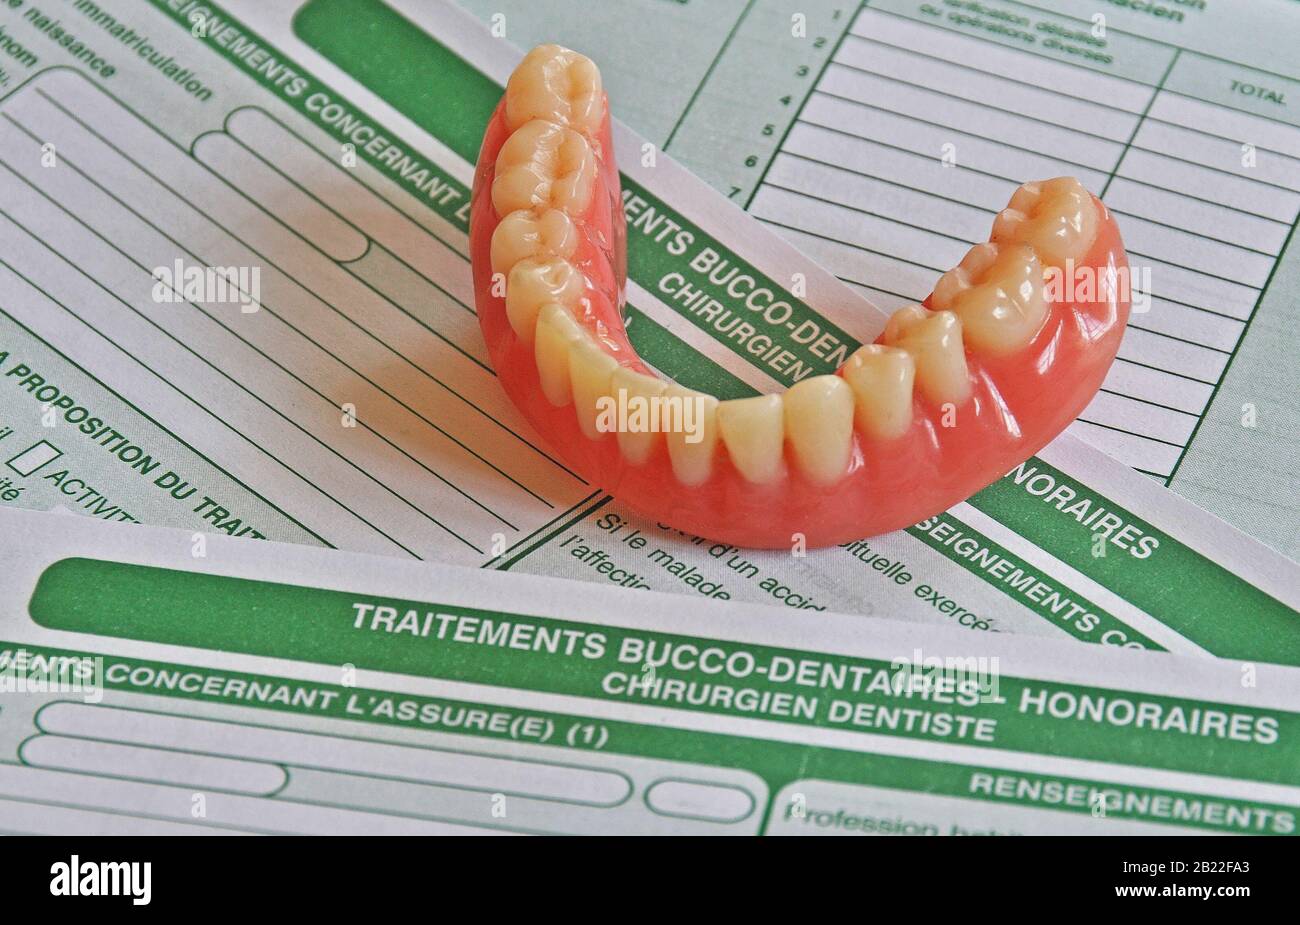 dental prosthesis on social security oral care sheets Stock Photo